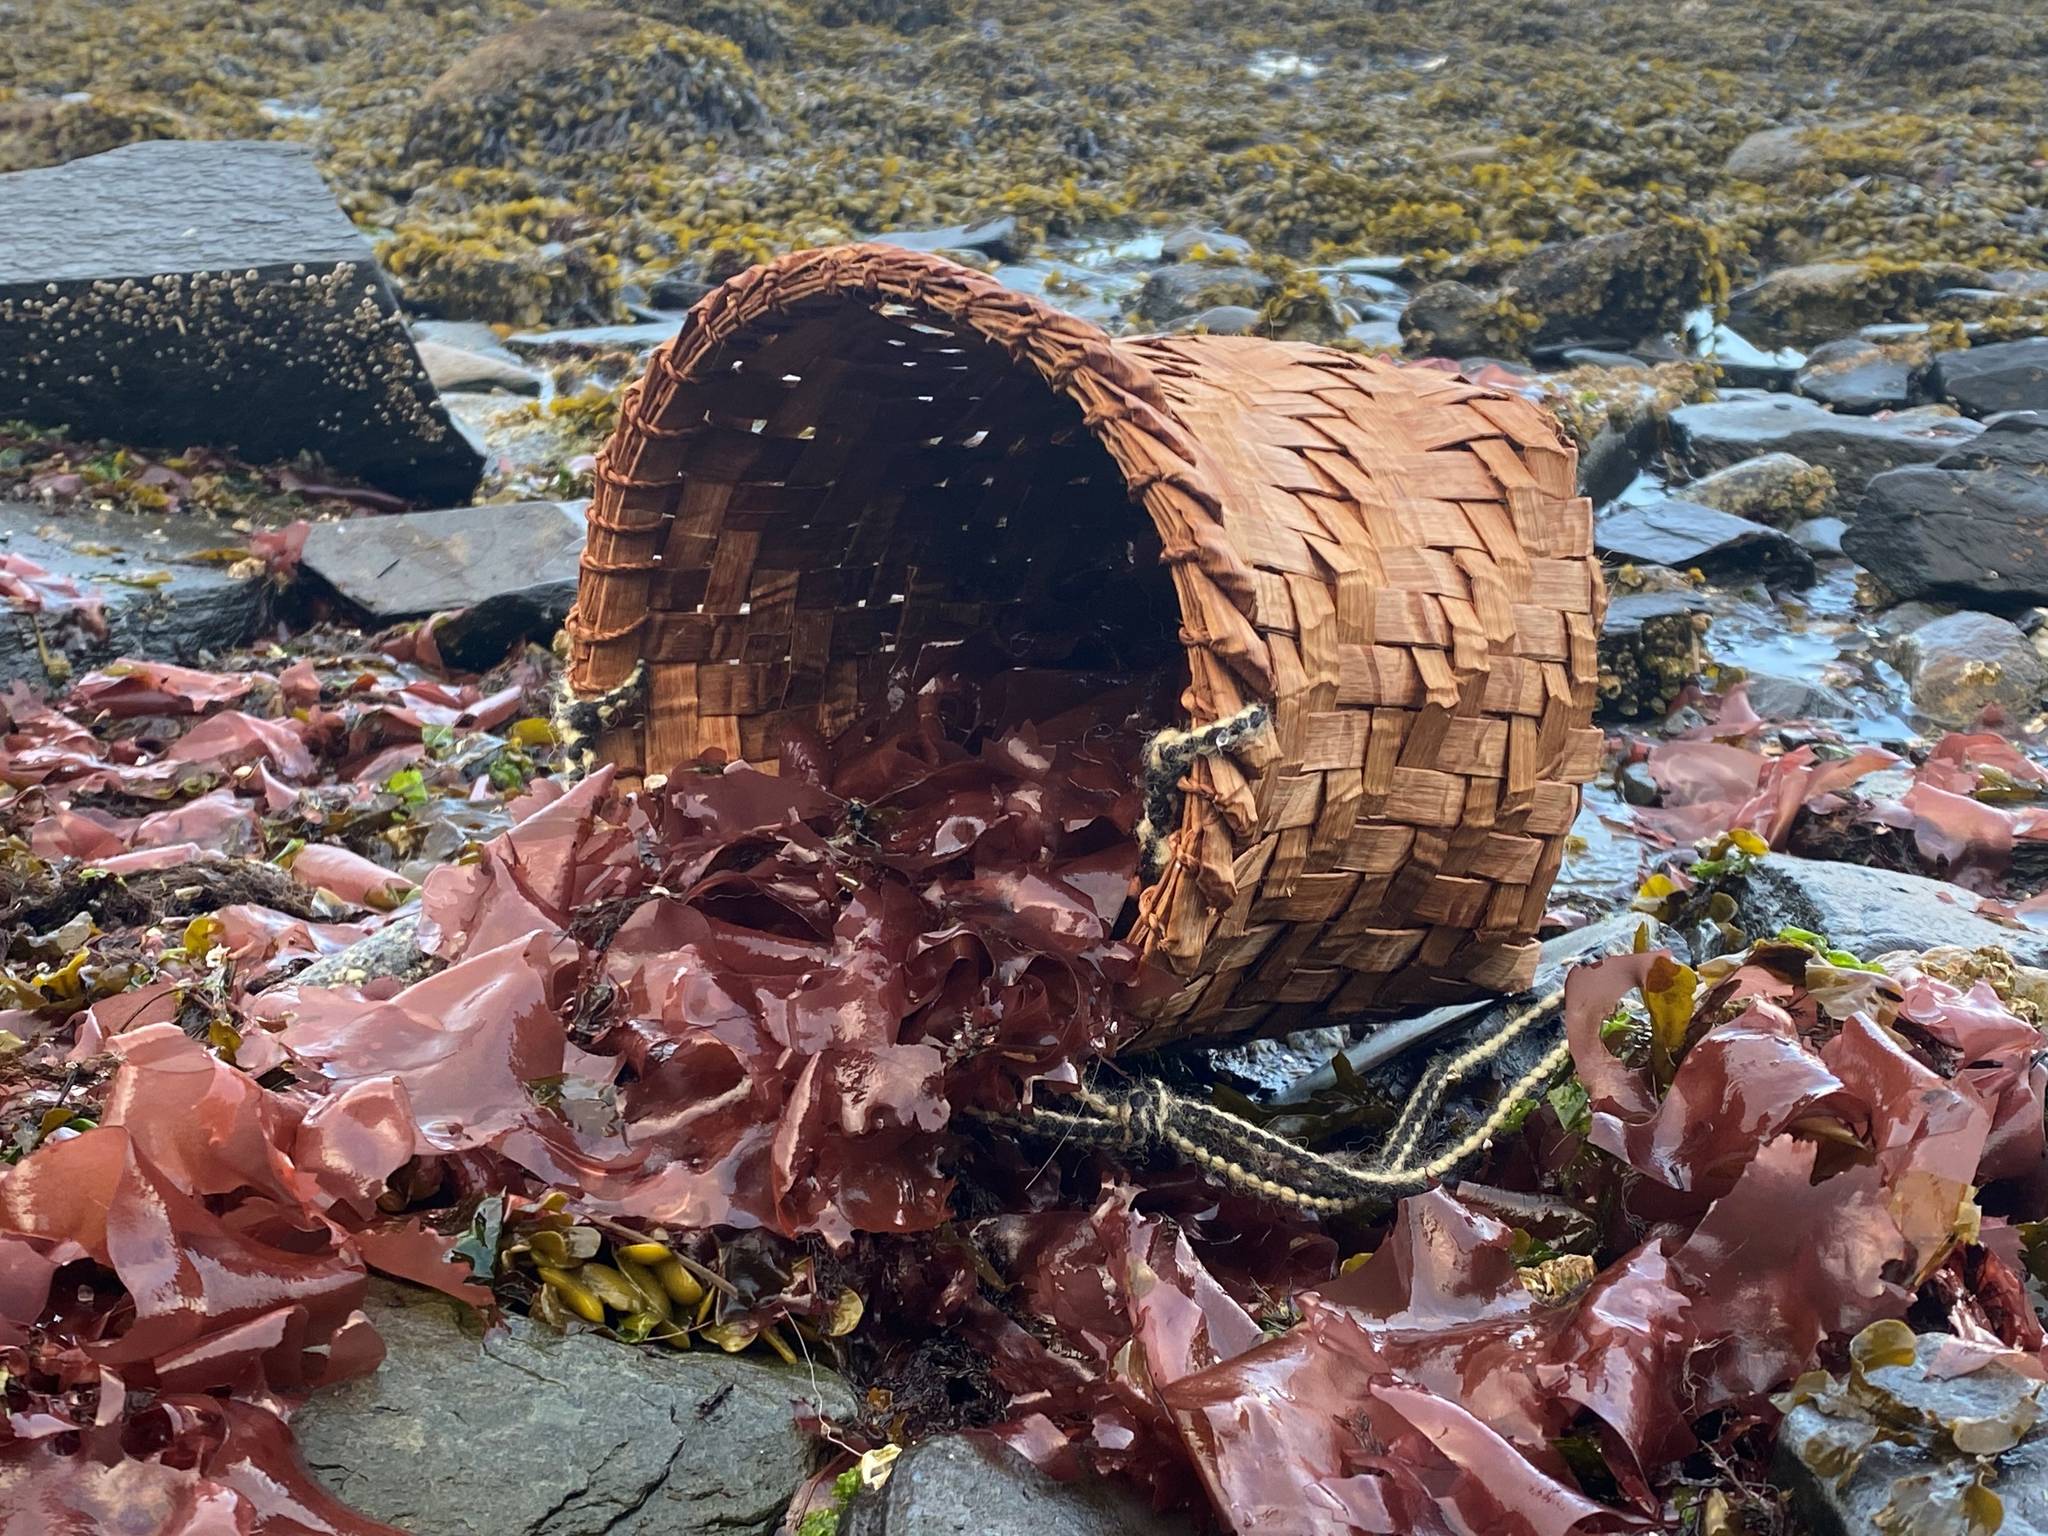 photos by Vivian Faith Prescott / For the Capital City Weekly 
A red cedar basket fills with red seaweed in Wrangell.
A red cedar basket fills with red seaweed in Wrangell. (Vivian Faith Prescott / For the Capital City Weekly)